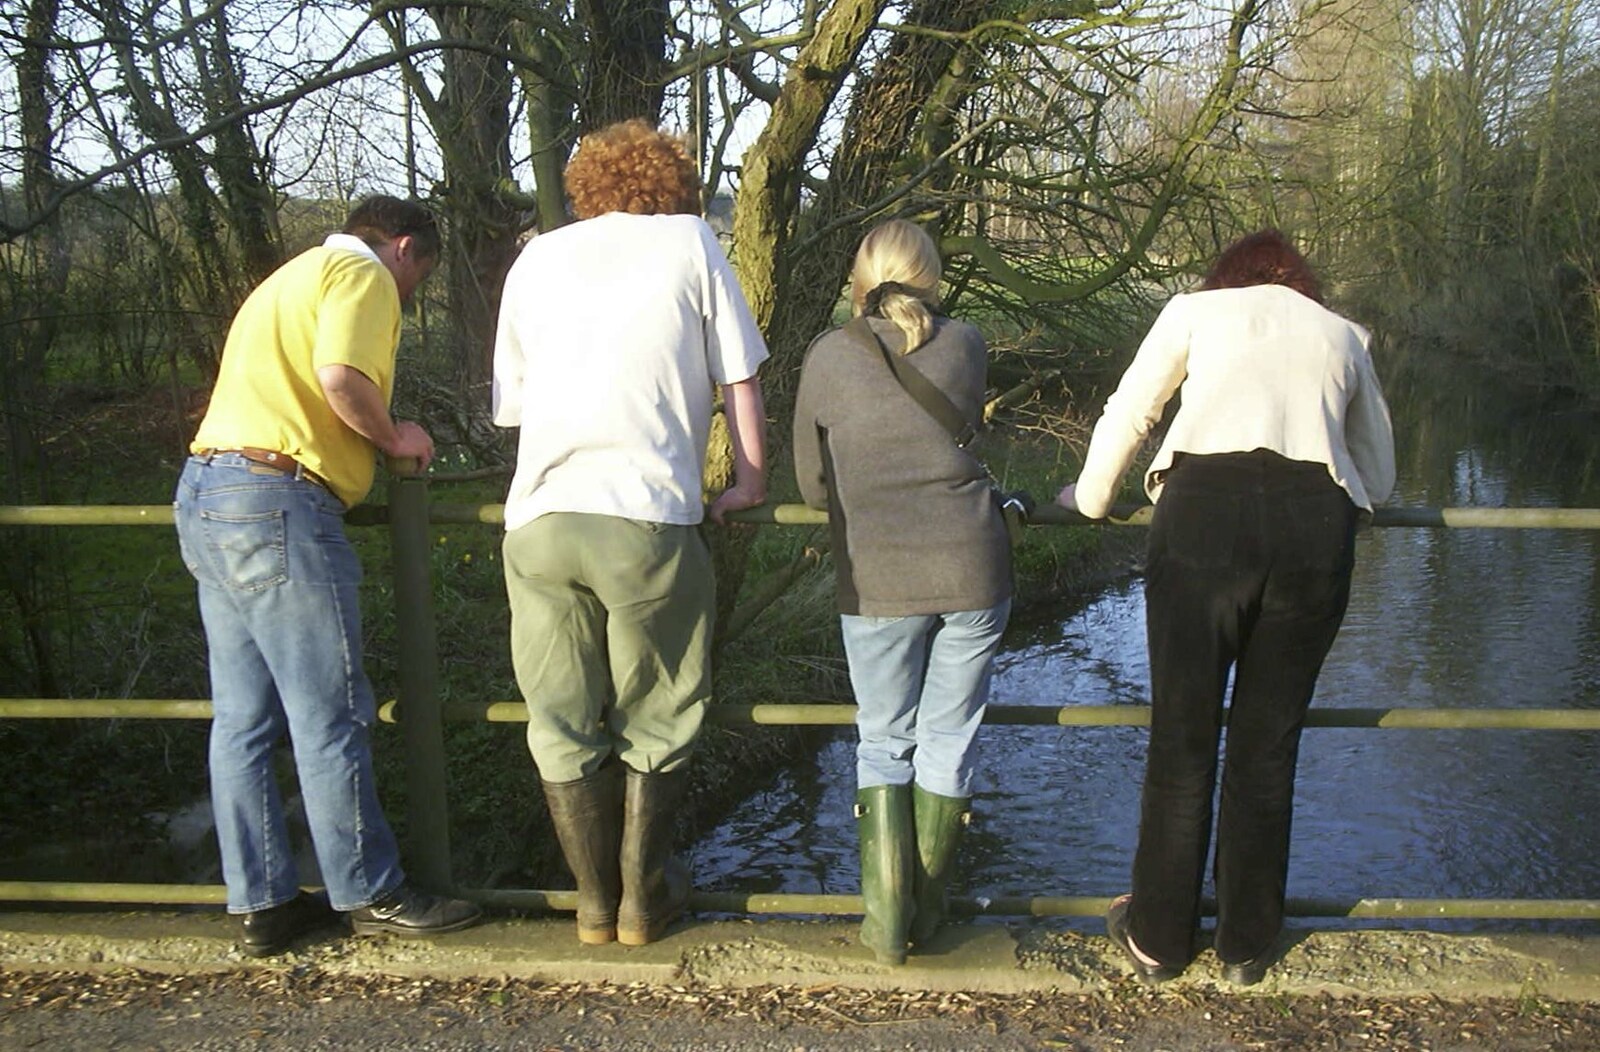 Playing Pooh-sticks over the bridge from Carolyn on Sunday, Wymondham, Norfolk - 23rd March 2003